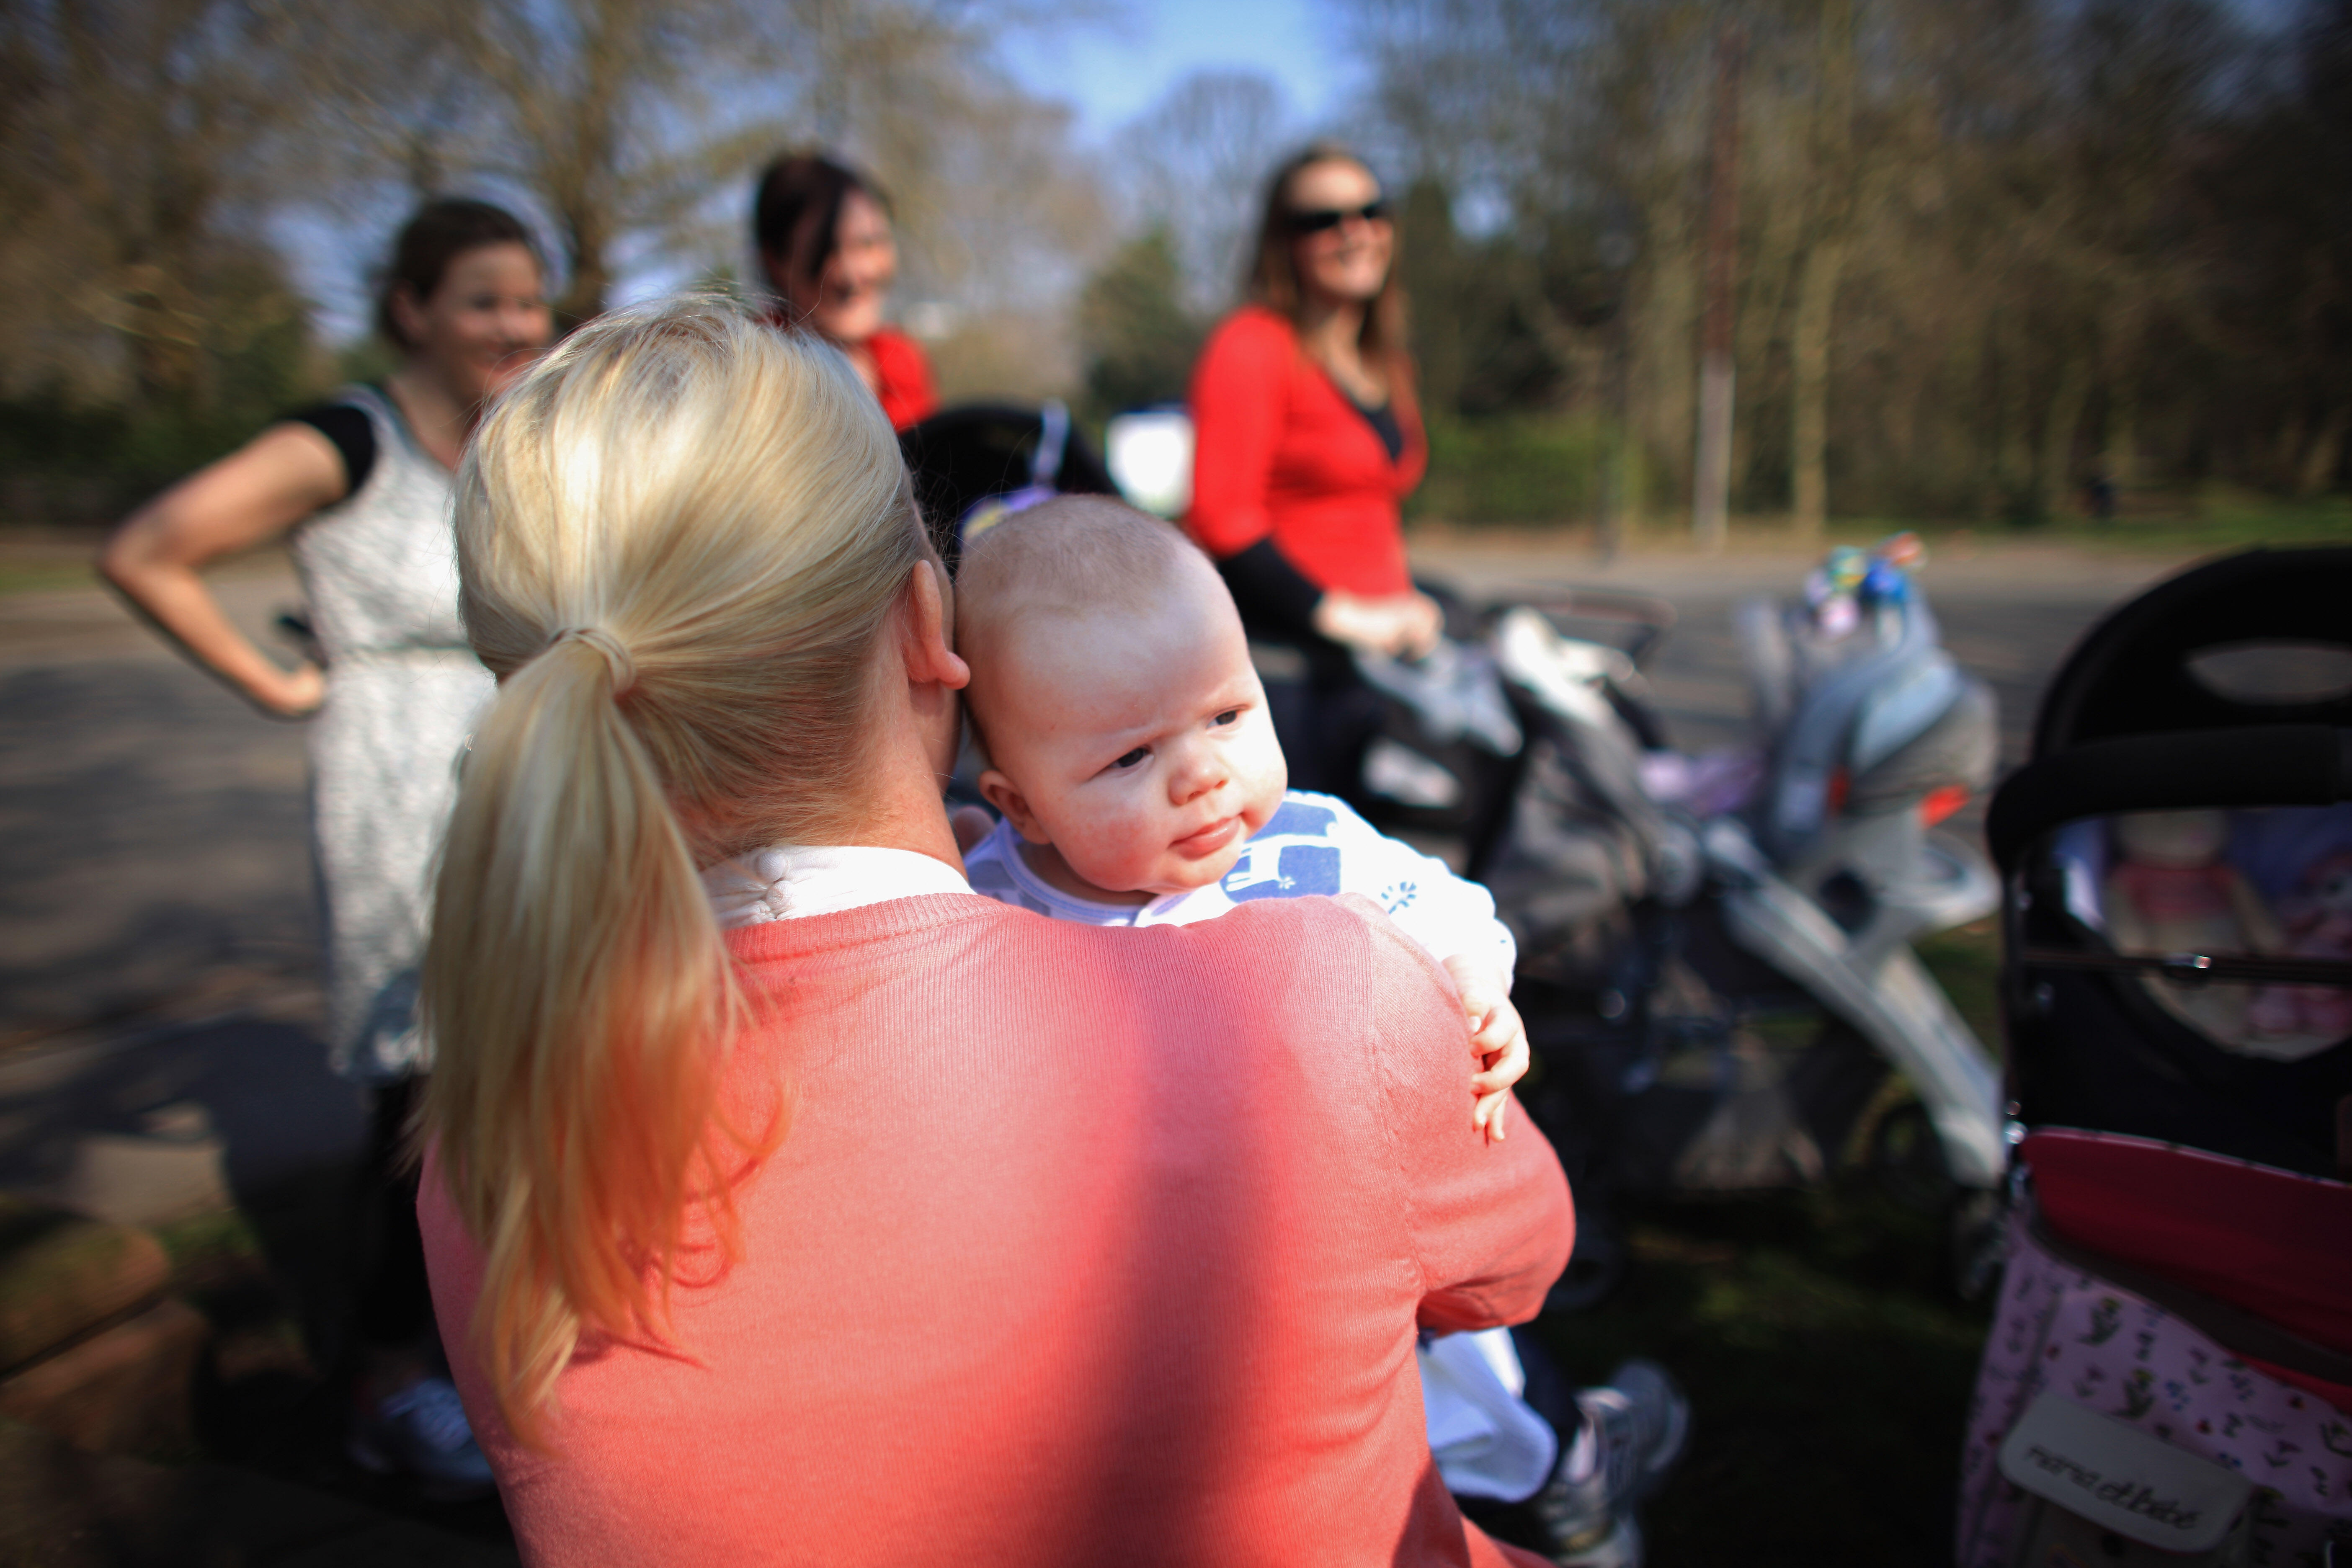 LIVERPOOL, UNITED KINGDOM - MARCH 23:  A group of mothers feed their children in Sefton Park, on the day that Britain's Chancellor George Osbourne delivers his annual budget on March 23, 2011 in Liverpool, United Kingdom. The Chancellor will implement fur